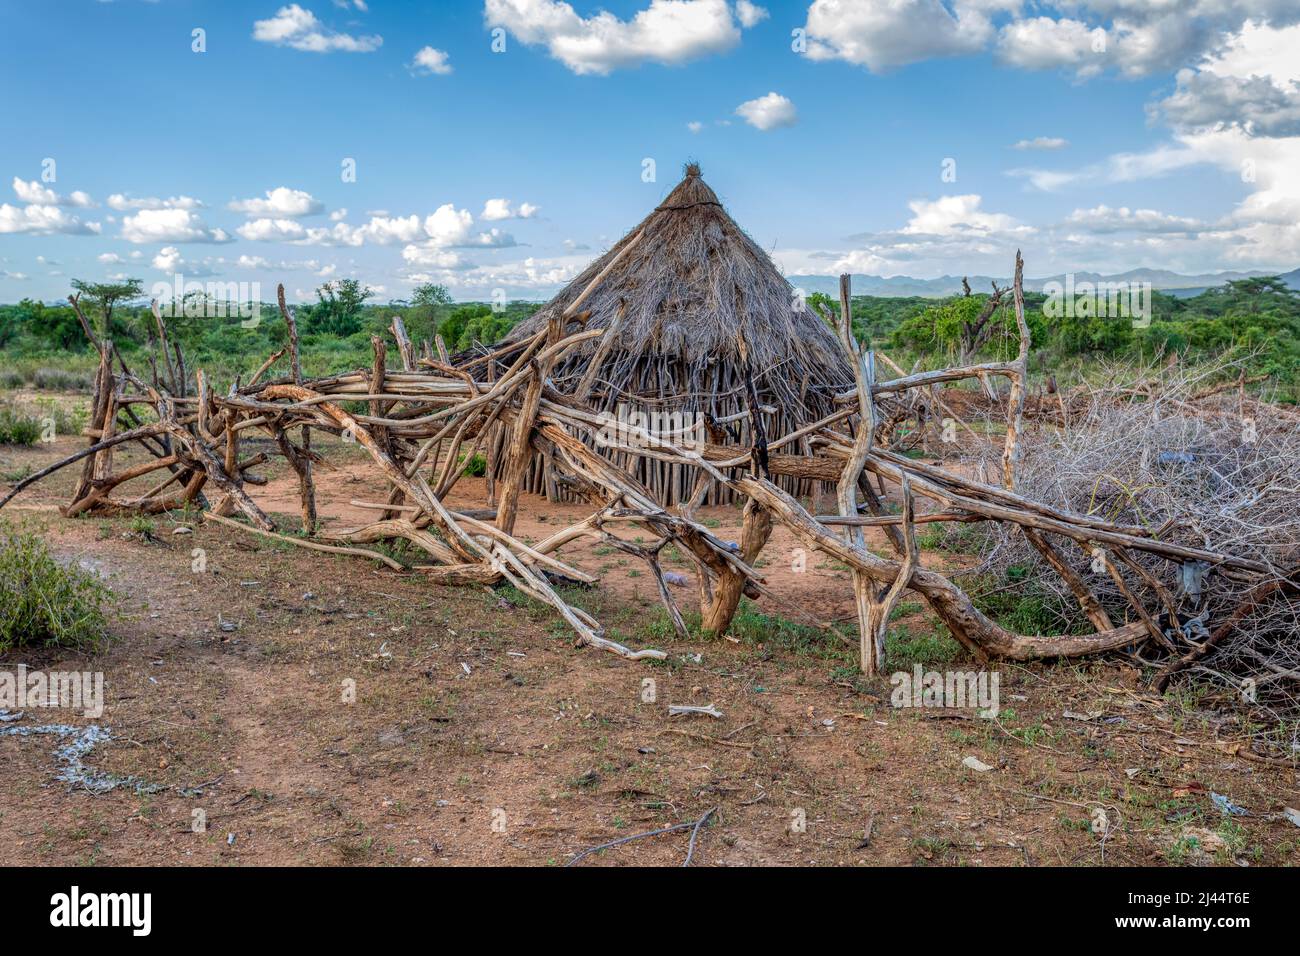 Traditional huts in Hamar Village, The Hamars are the original tribe in southwestern Ethiopia, Africa. They are largely pastoralists, so their culture Stock Photo